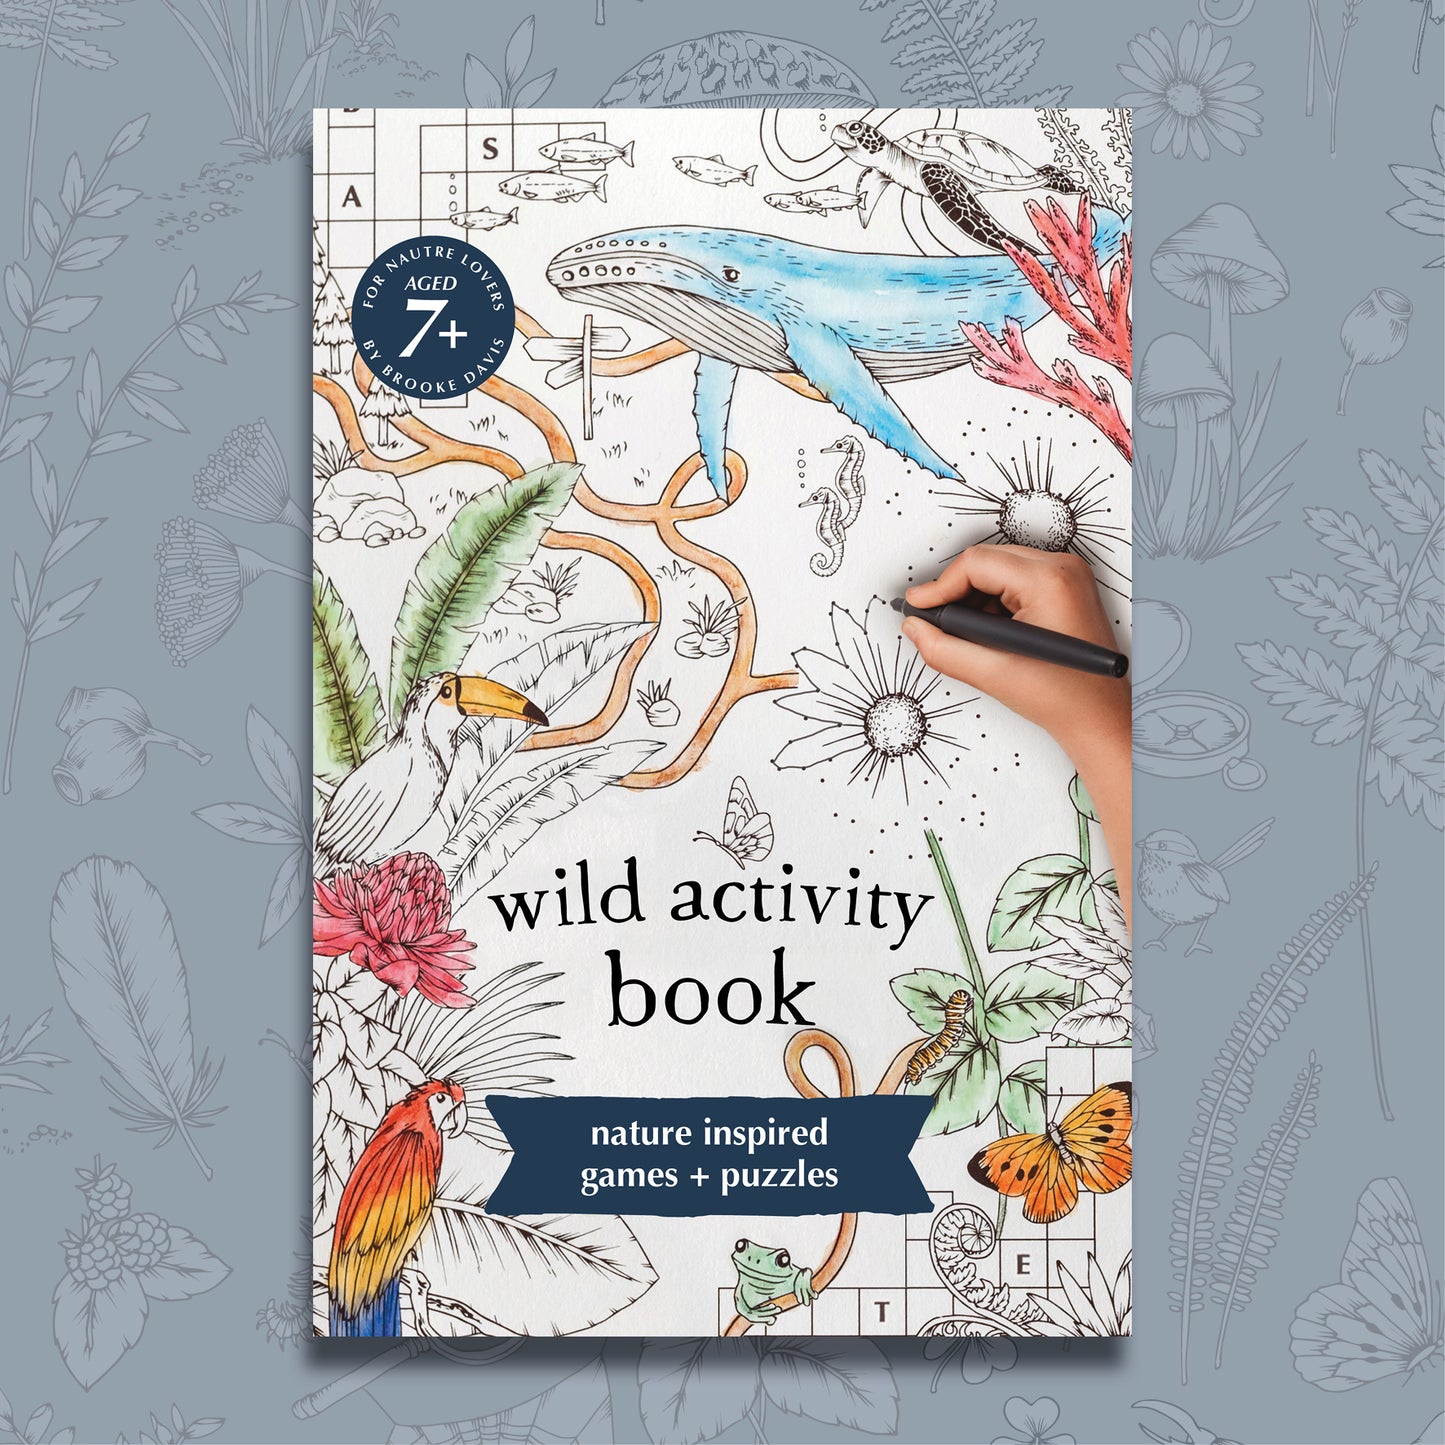 Wild activity book front cover